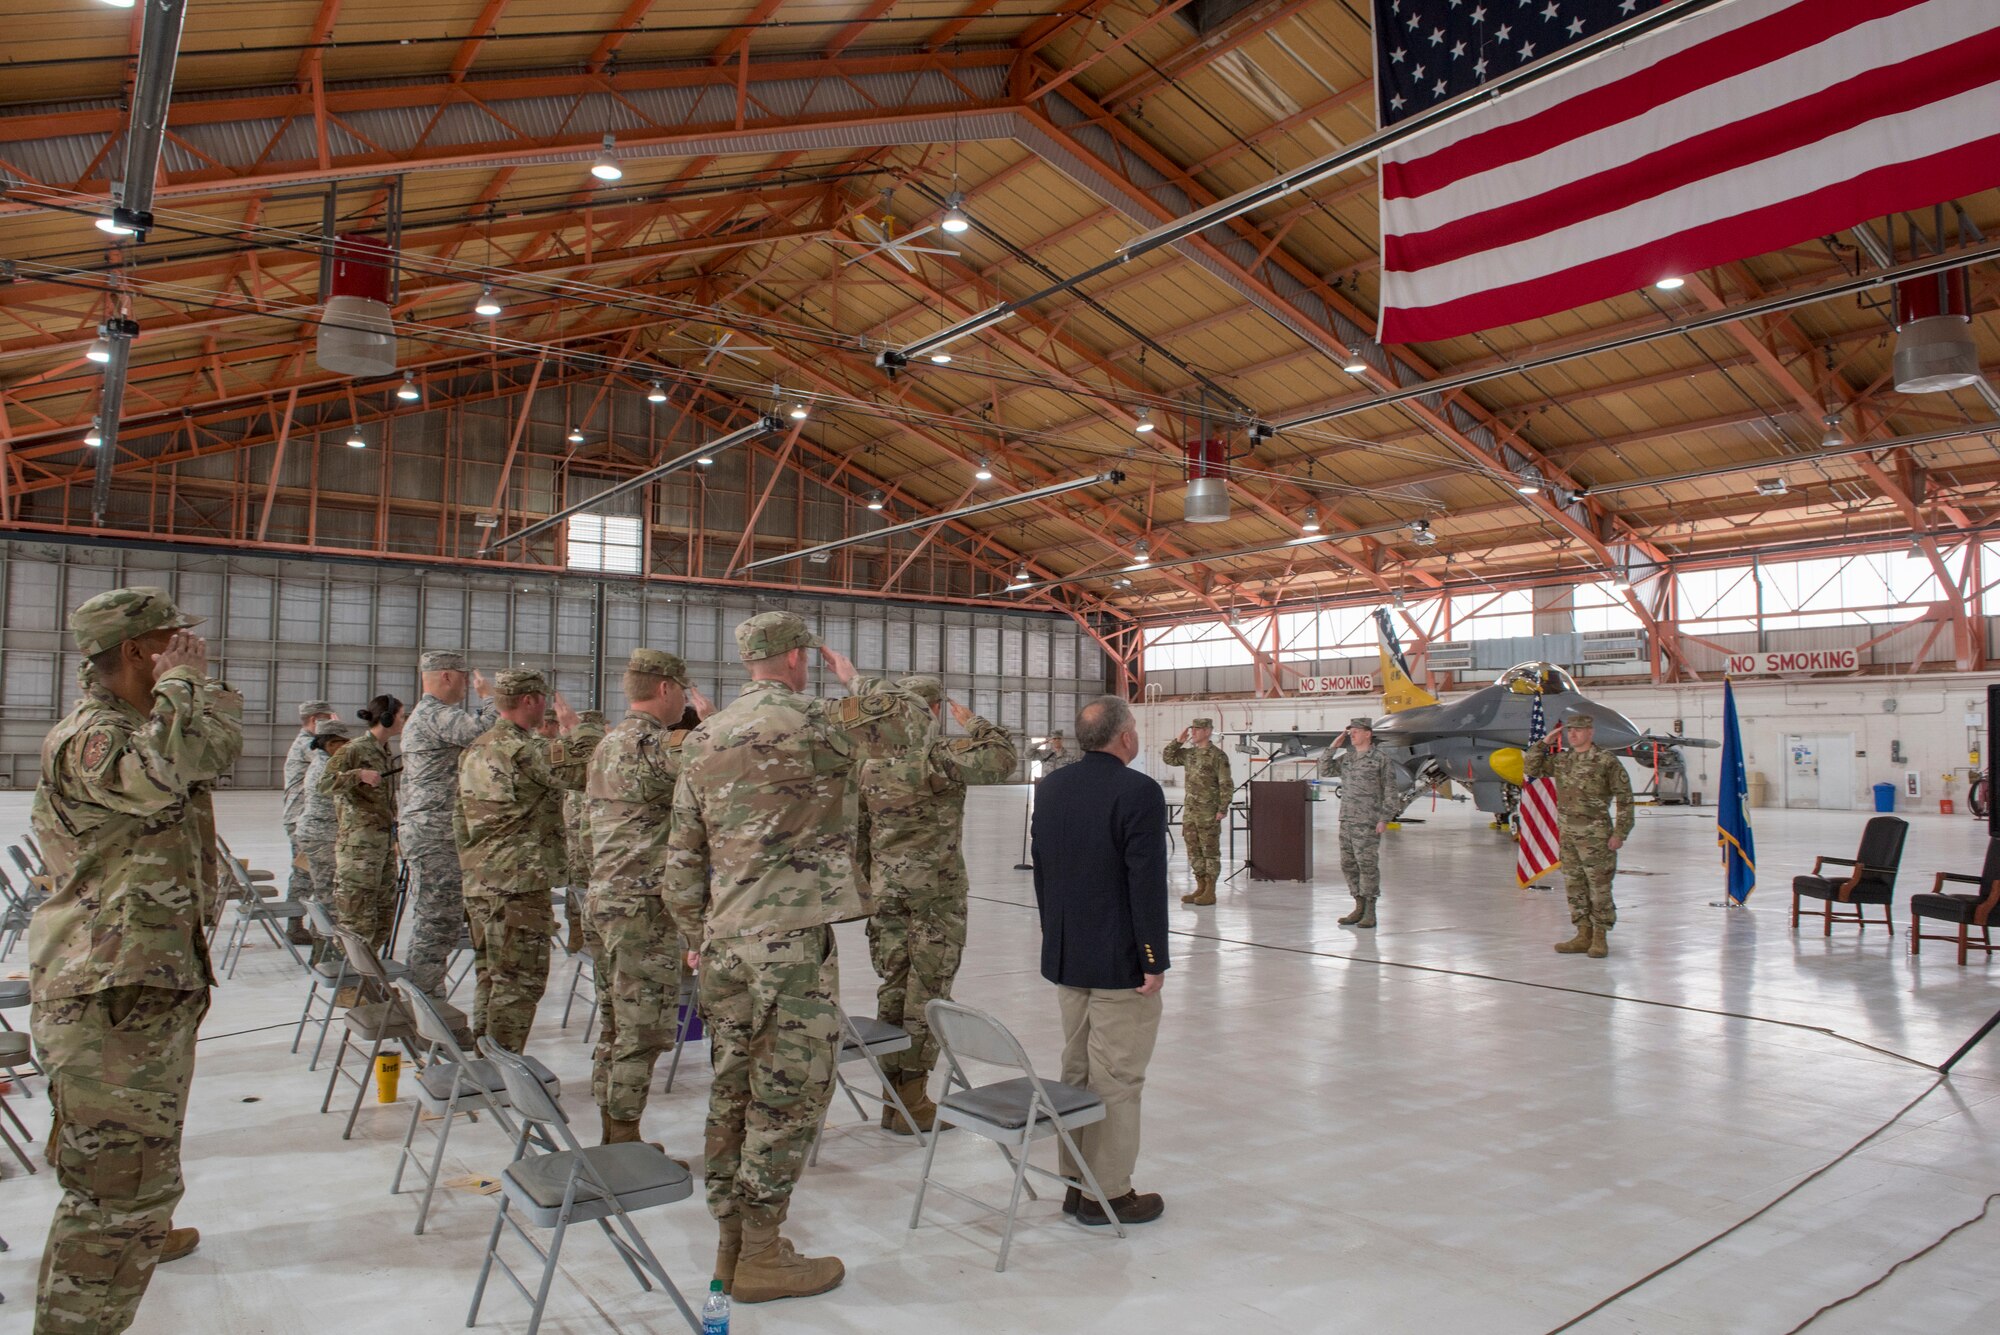 49th Wing Airmen render salutes during the National Anthem at the 49th Maintenance Group Change of Command ceremony May 15, 2020, on Holloman Air Force Base, N.M. Col. Joseph Campo, 49th WG commander, presided over the ceremony, at which Col. Tim Harbor, outgoing 49th MXG commander, relinquished command to Col. Thomas Preston, incoming 49th MXG commander. (U.S. Air Force photo by Staff Sgt. Christine Groening)